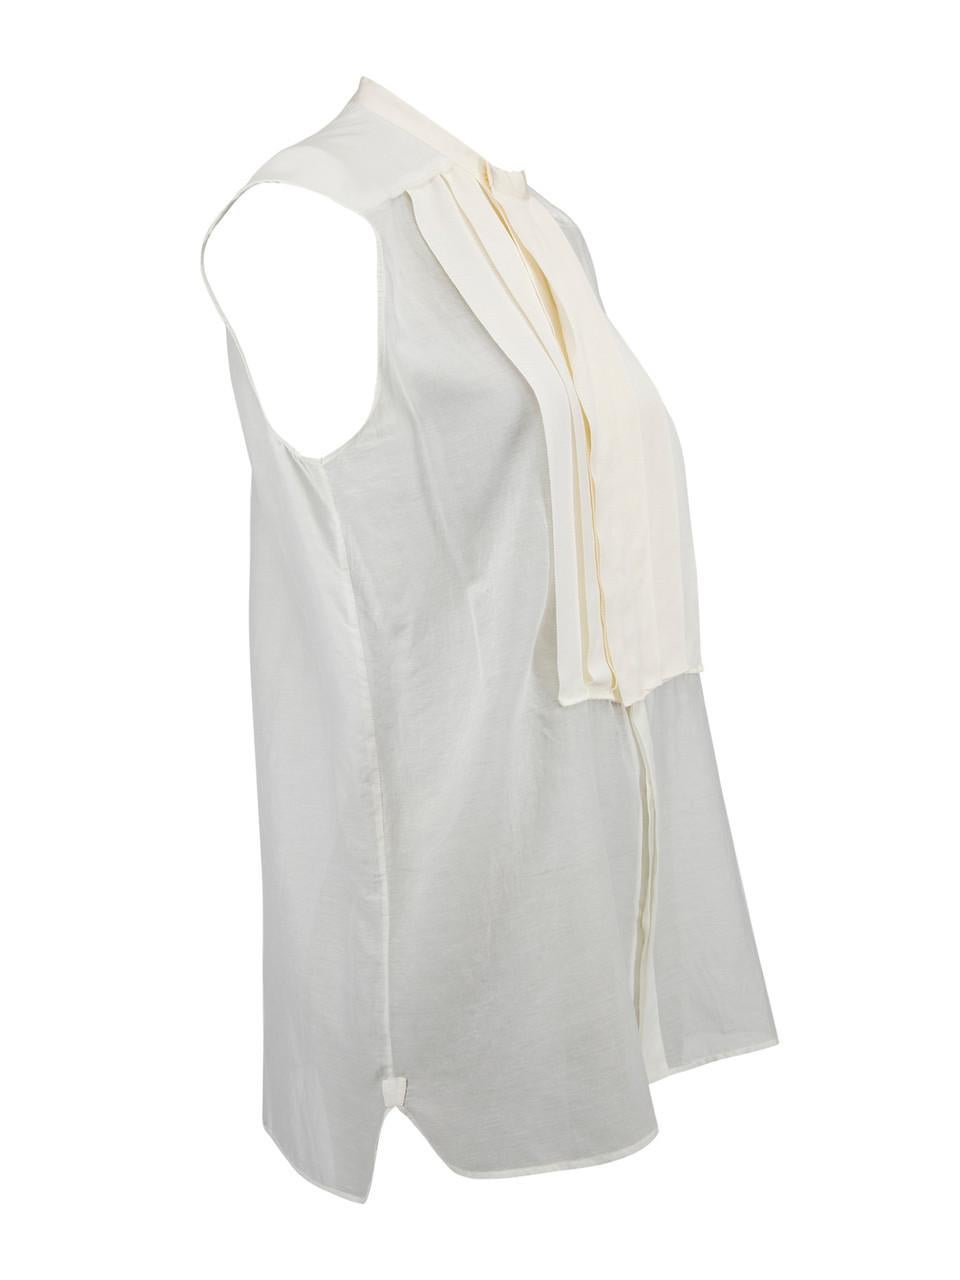 CONDITION is Very good. Minimal wear to blouse is evident. Minimal wear to the pleated detail on this used Lanvin designer resale item. Details White Cotton Silk Blouse Pleat detail Loose fit Sleeveless Round neck Made in Italy Composition 70%